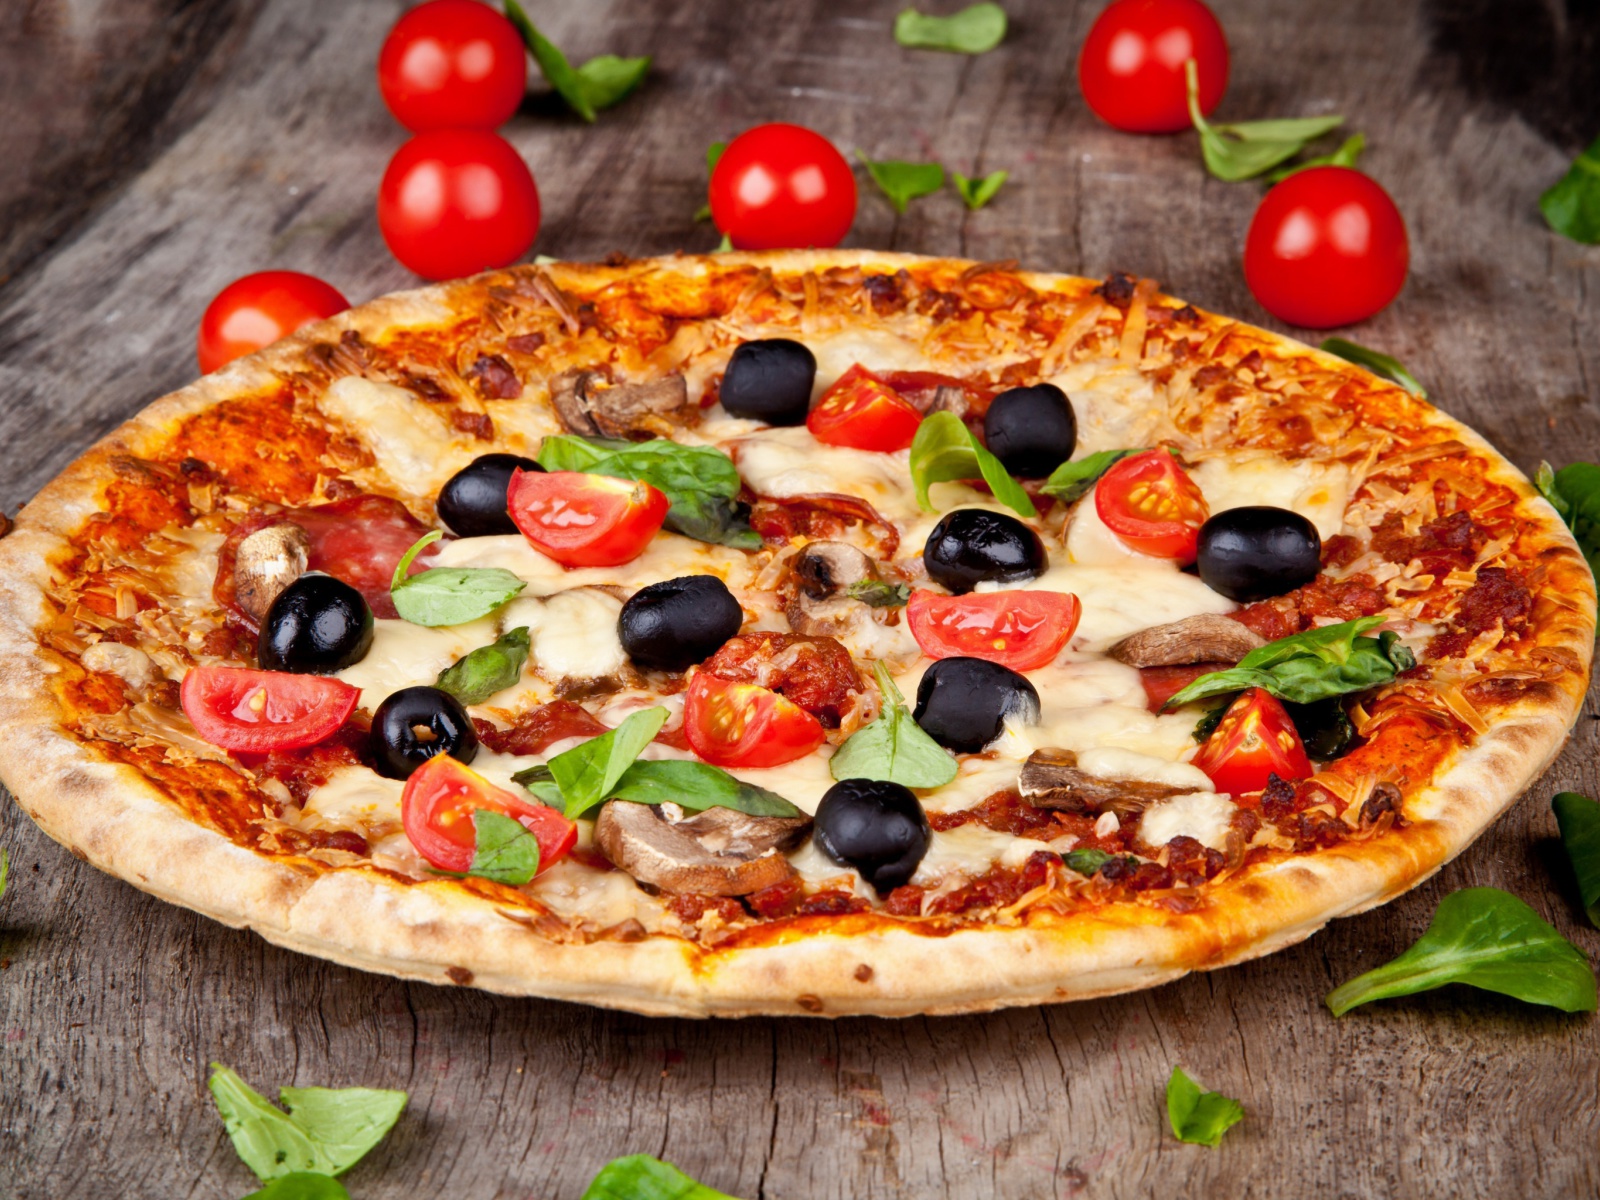 Pizza with tomatoes and olives wallpaper 1600x1200